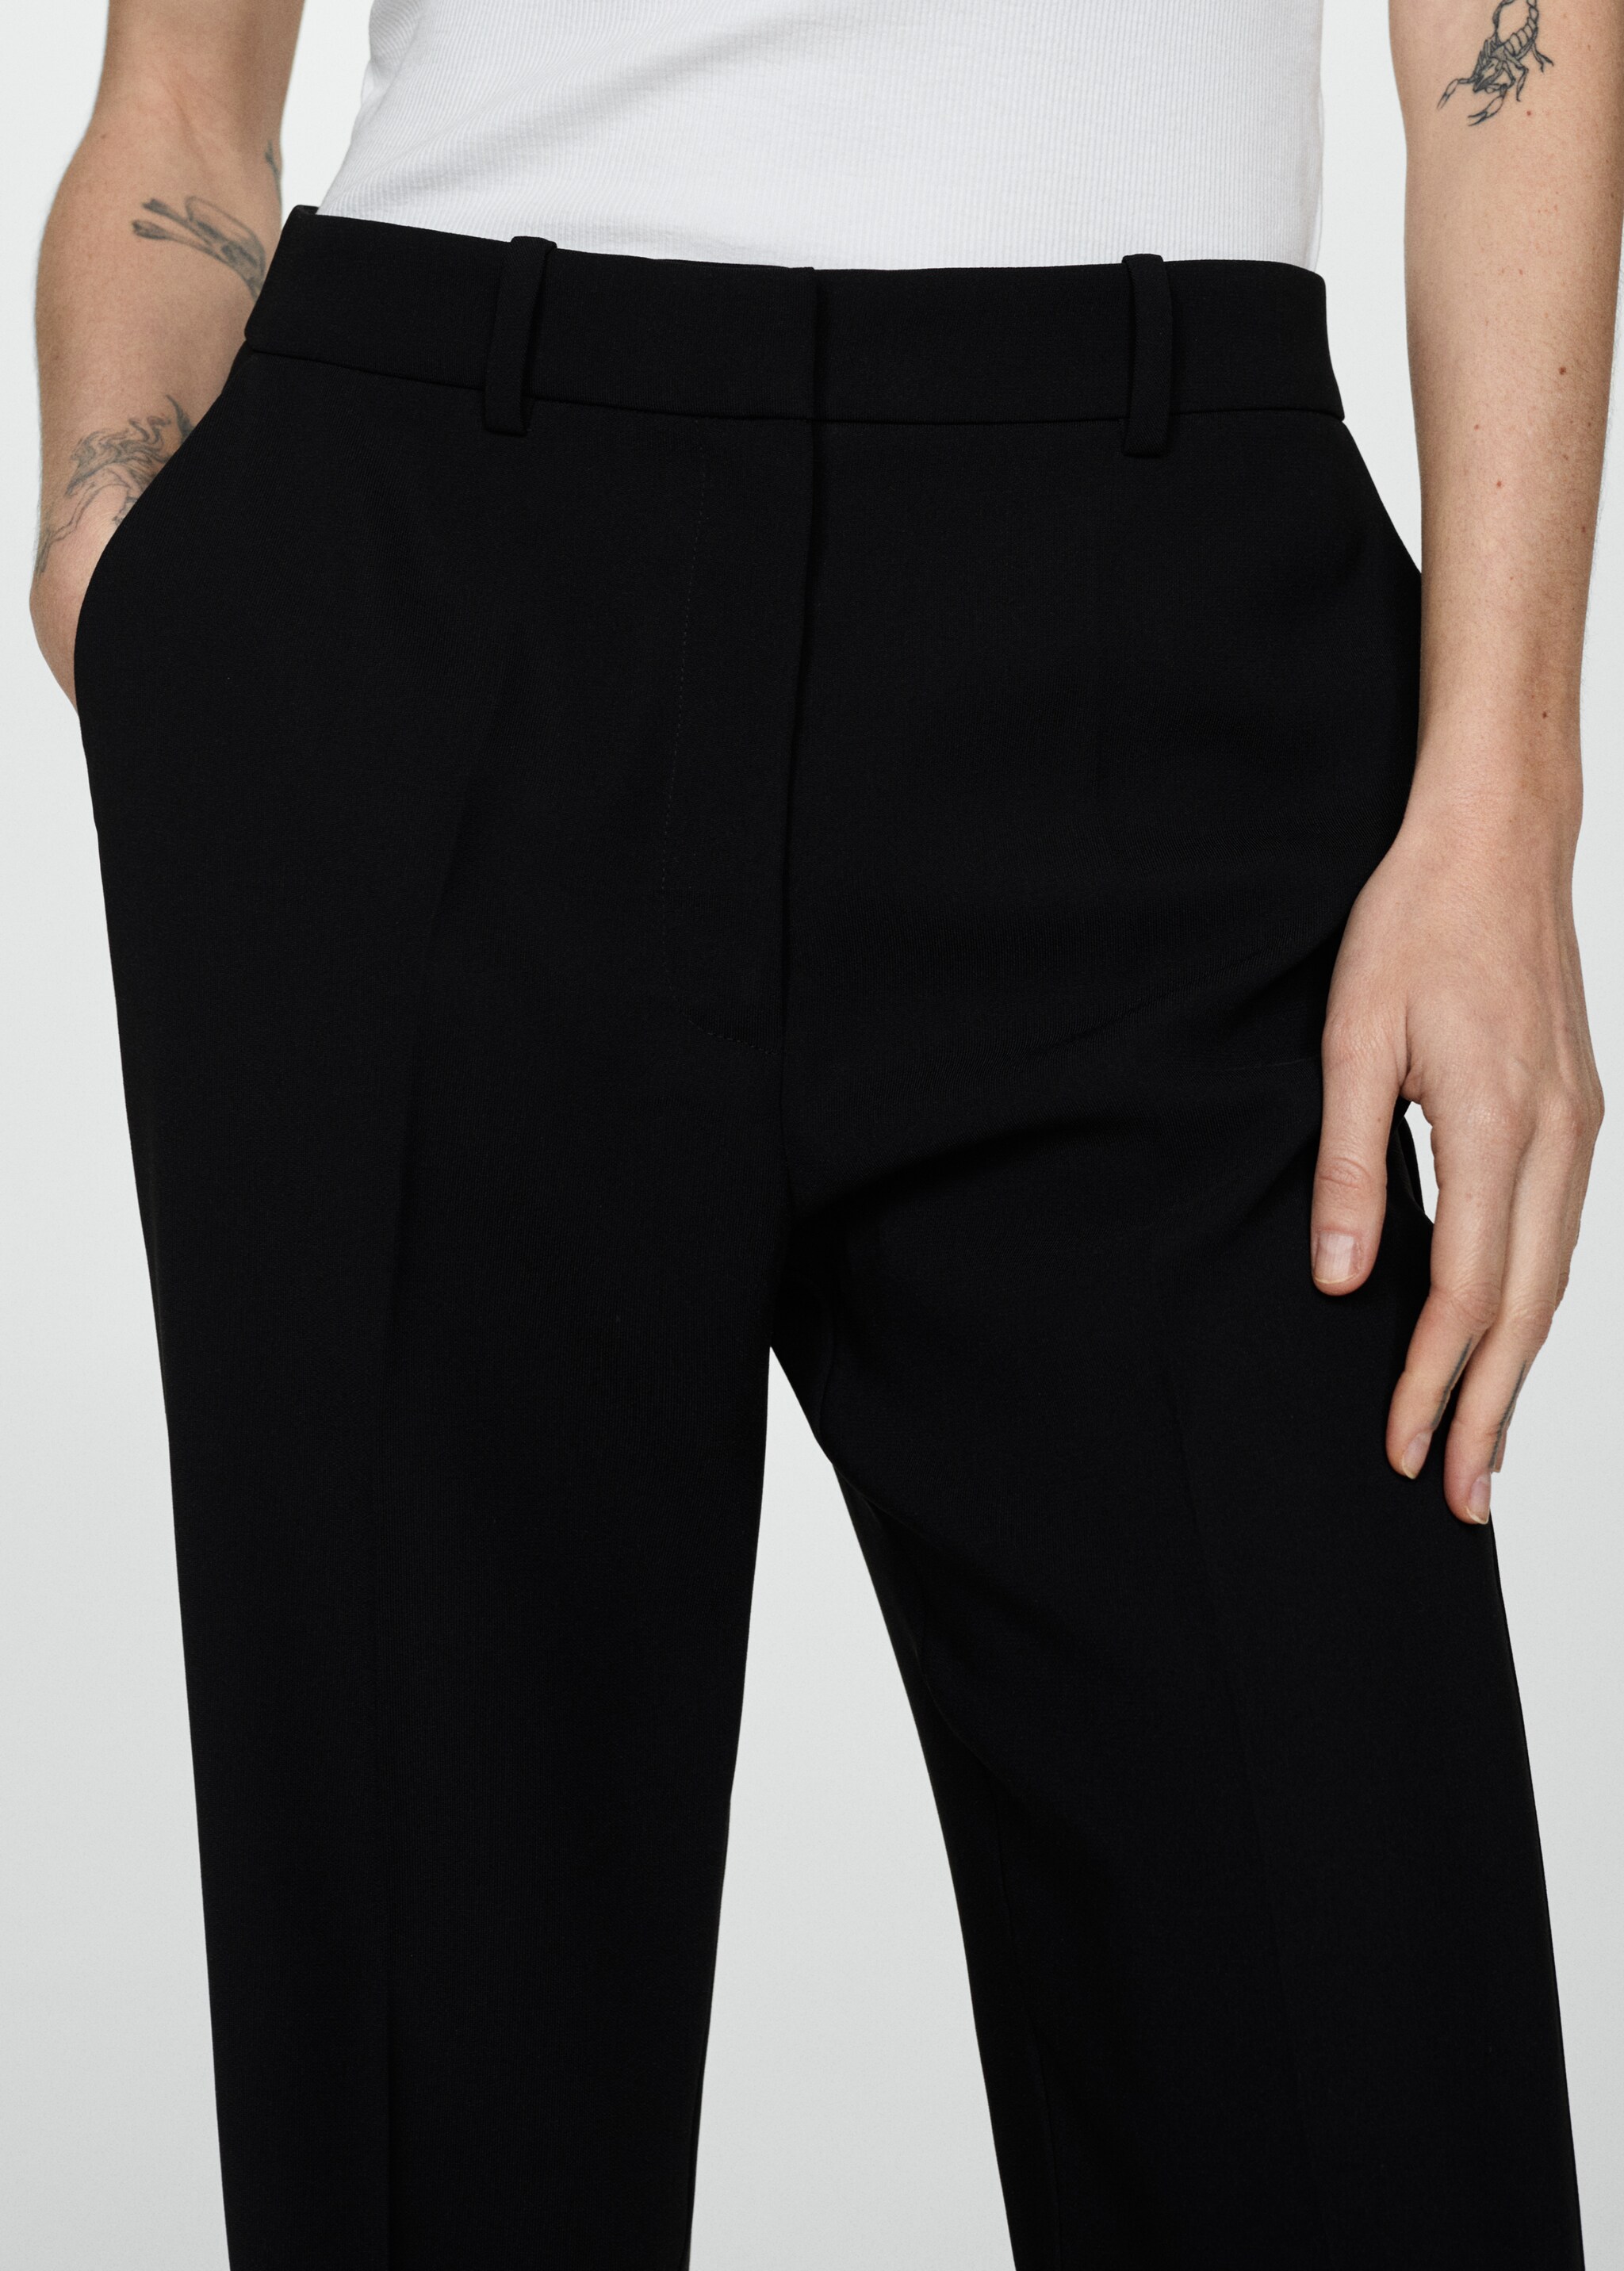 Flared trouser suit - Details of the article 1